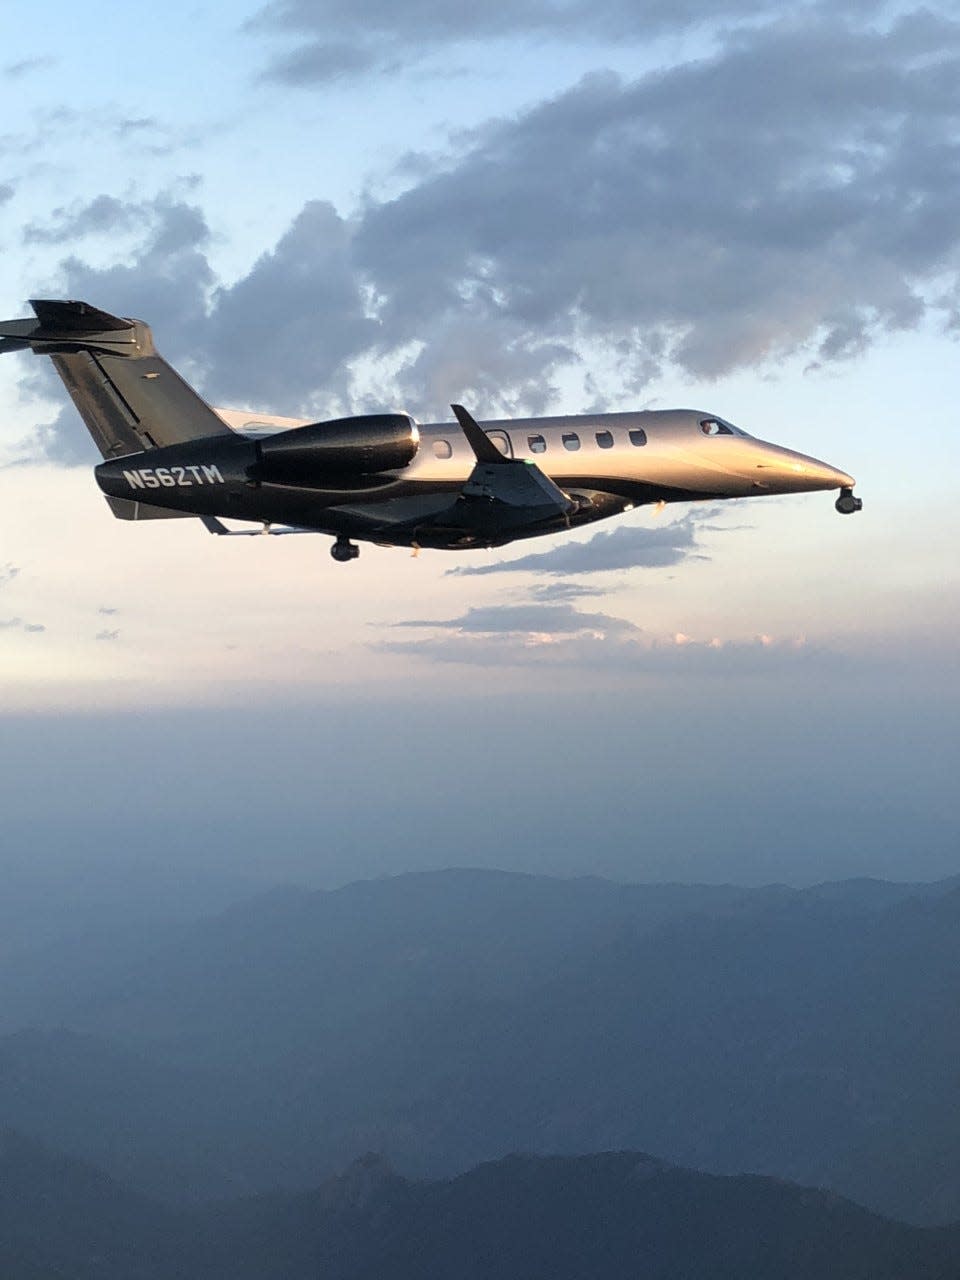 The specially outfitted Embraer Phenom 300E "camera ship" used to film "Top Gun: Maverick."